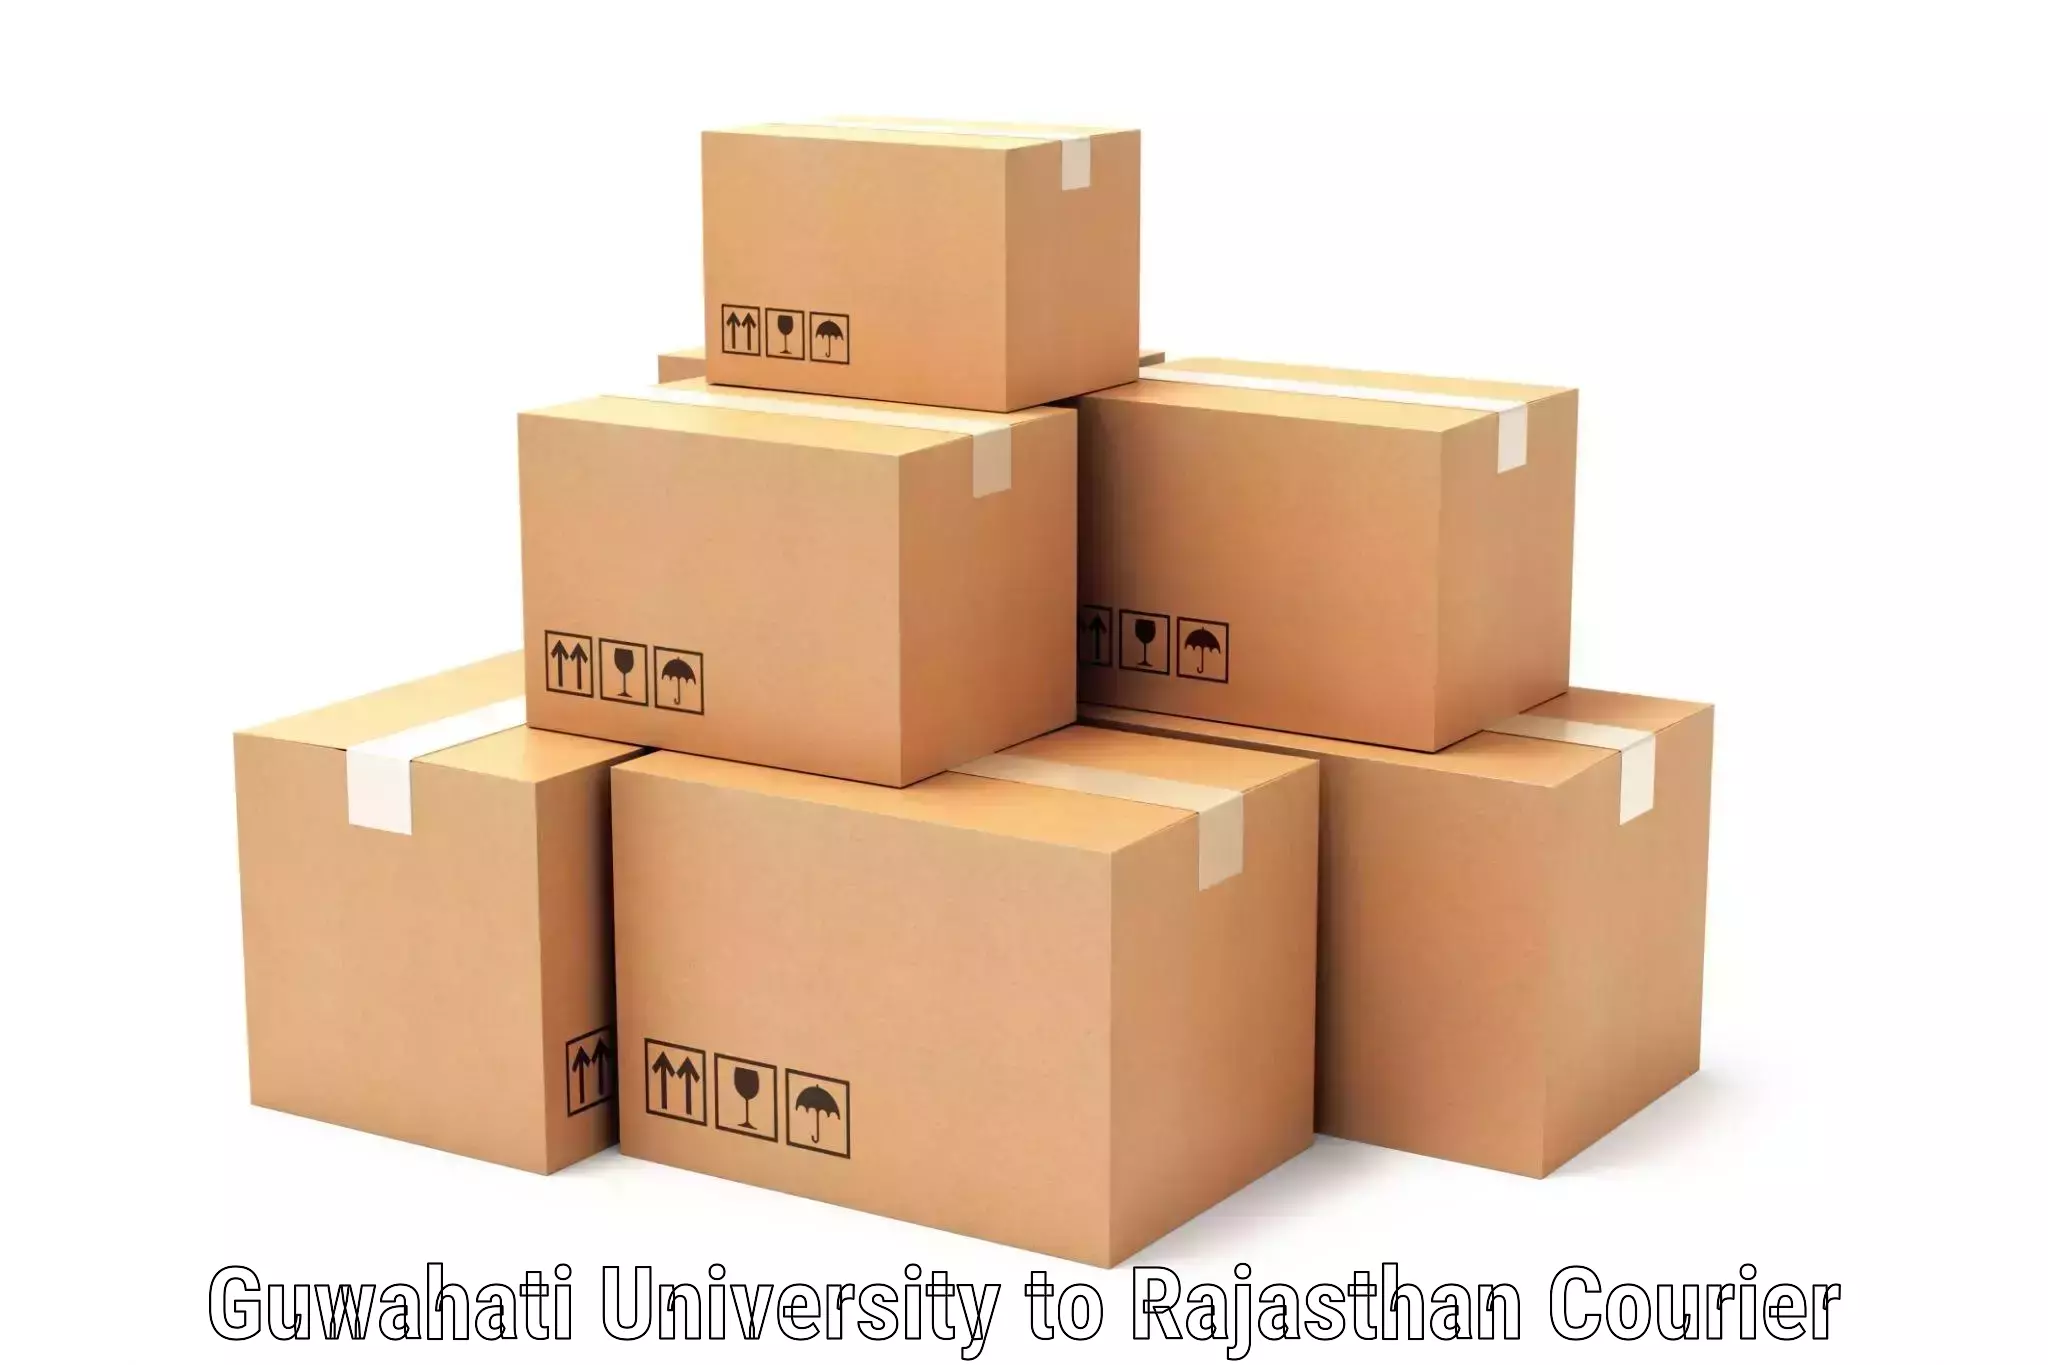 Easy access courier services in Guwahati University to Bhinmal